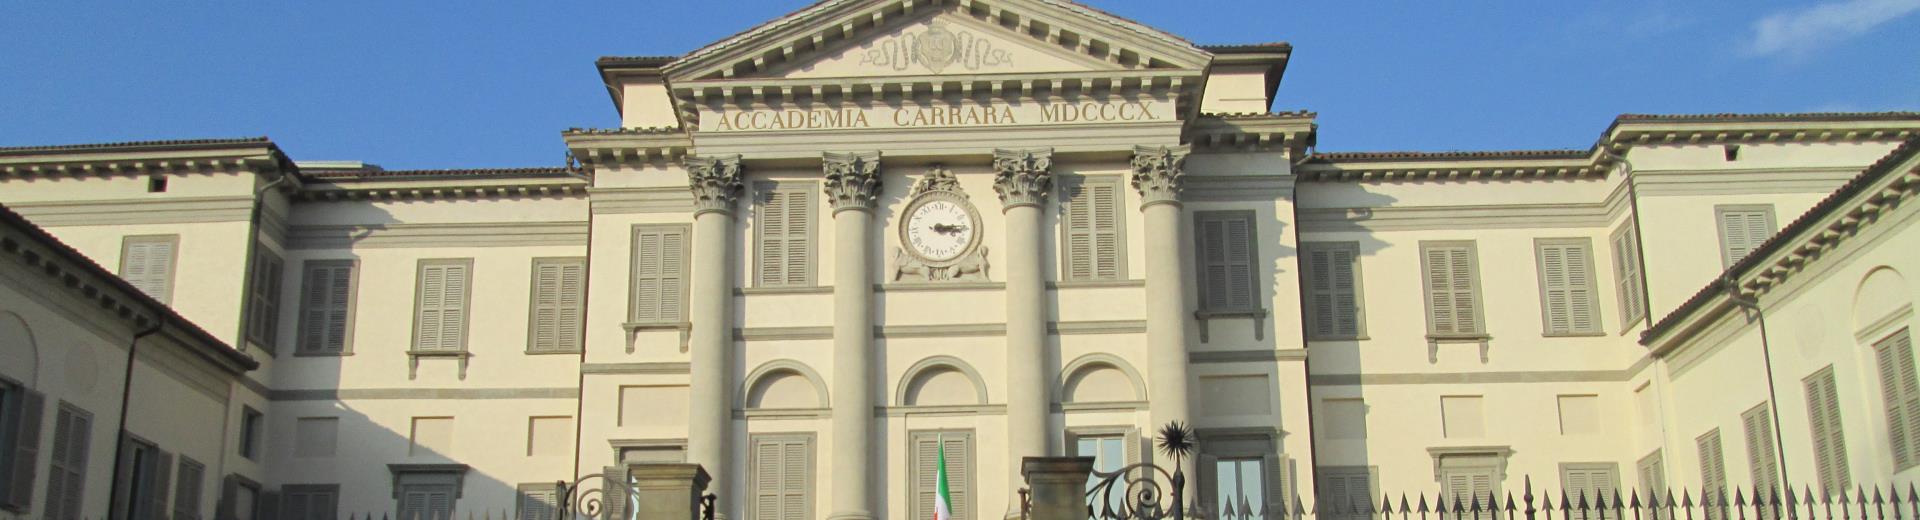 Visit the Polo dell'Arte of Bergamo and discover all the masterpieces that this city holds!